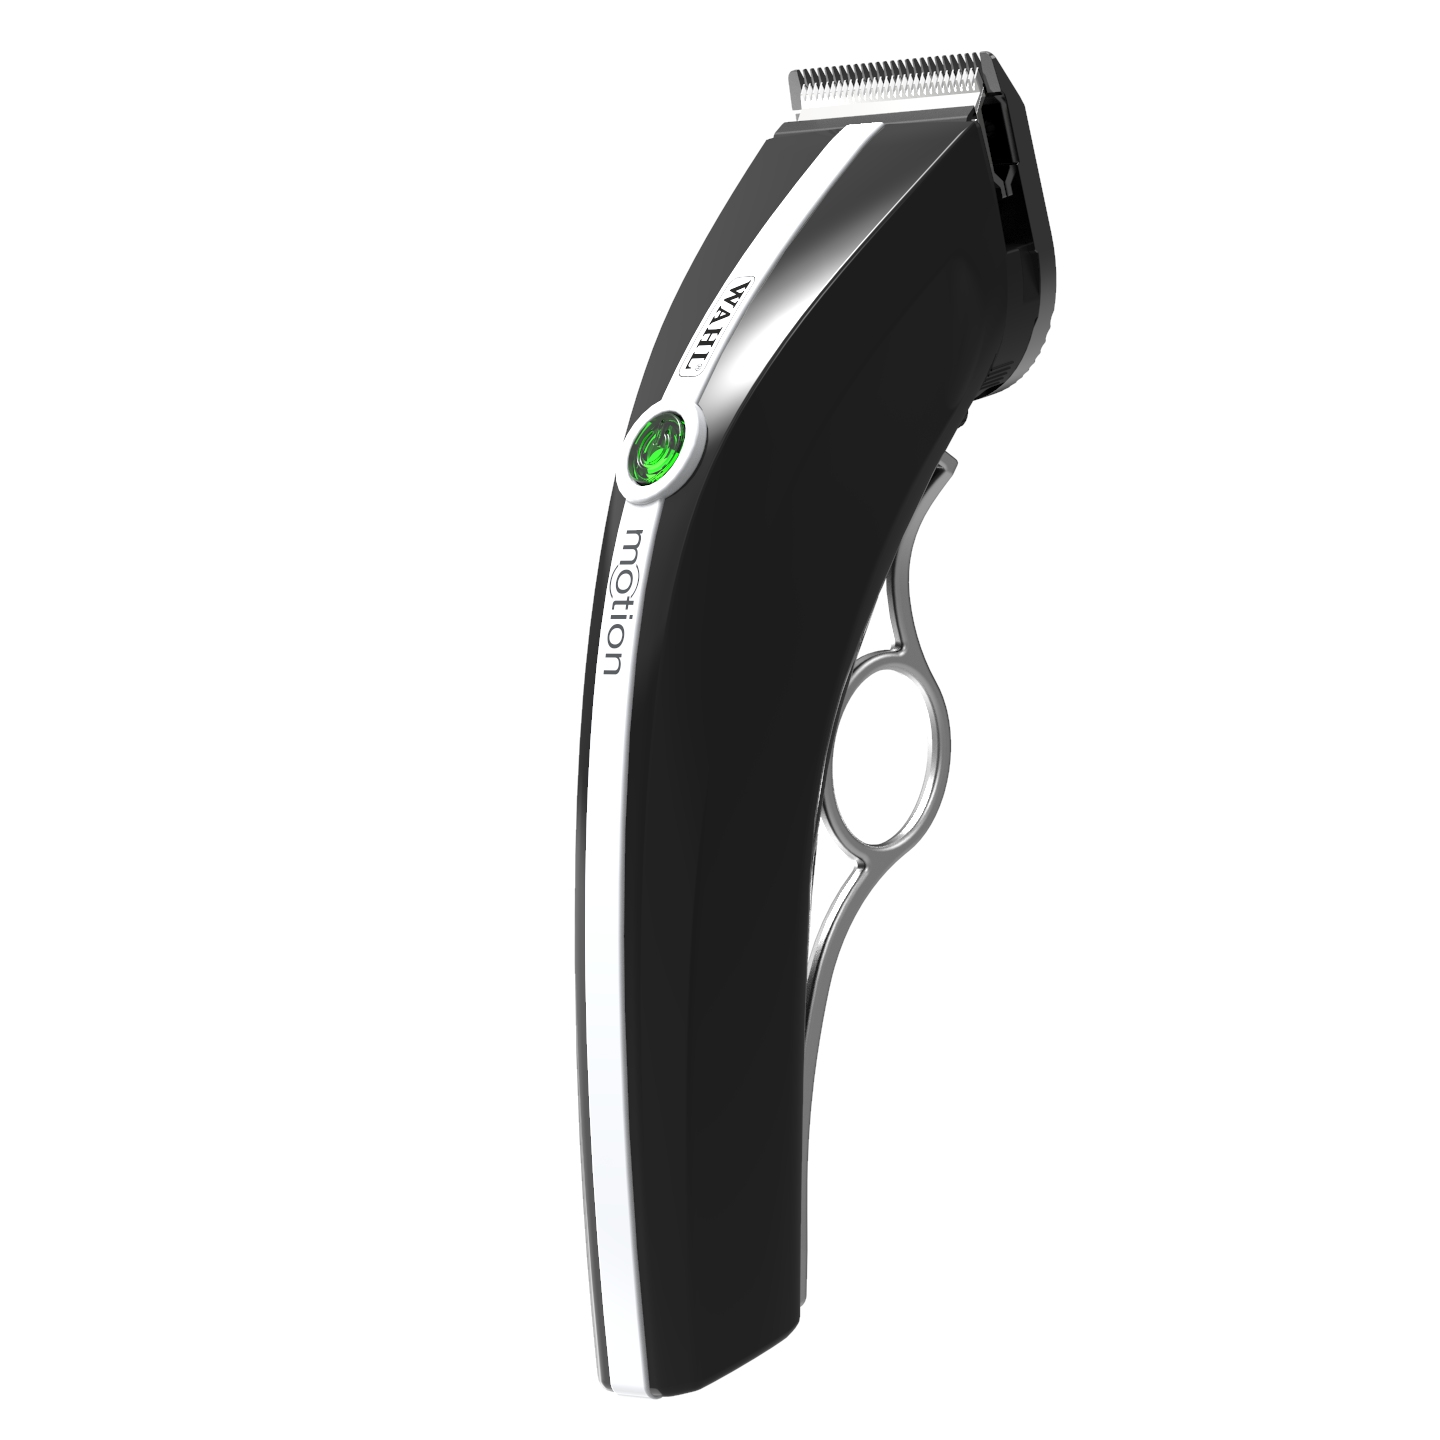 wahl motion lithium ion clipper